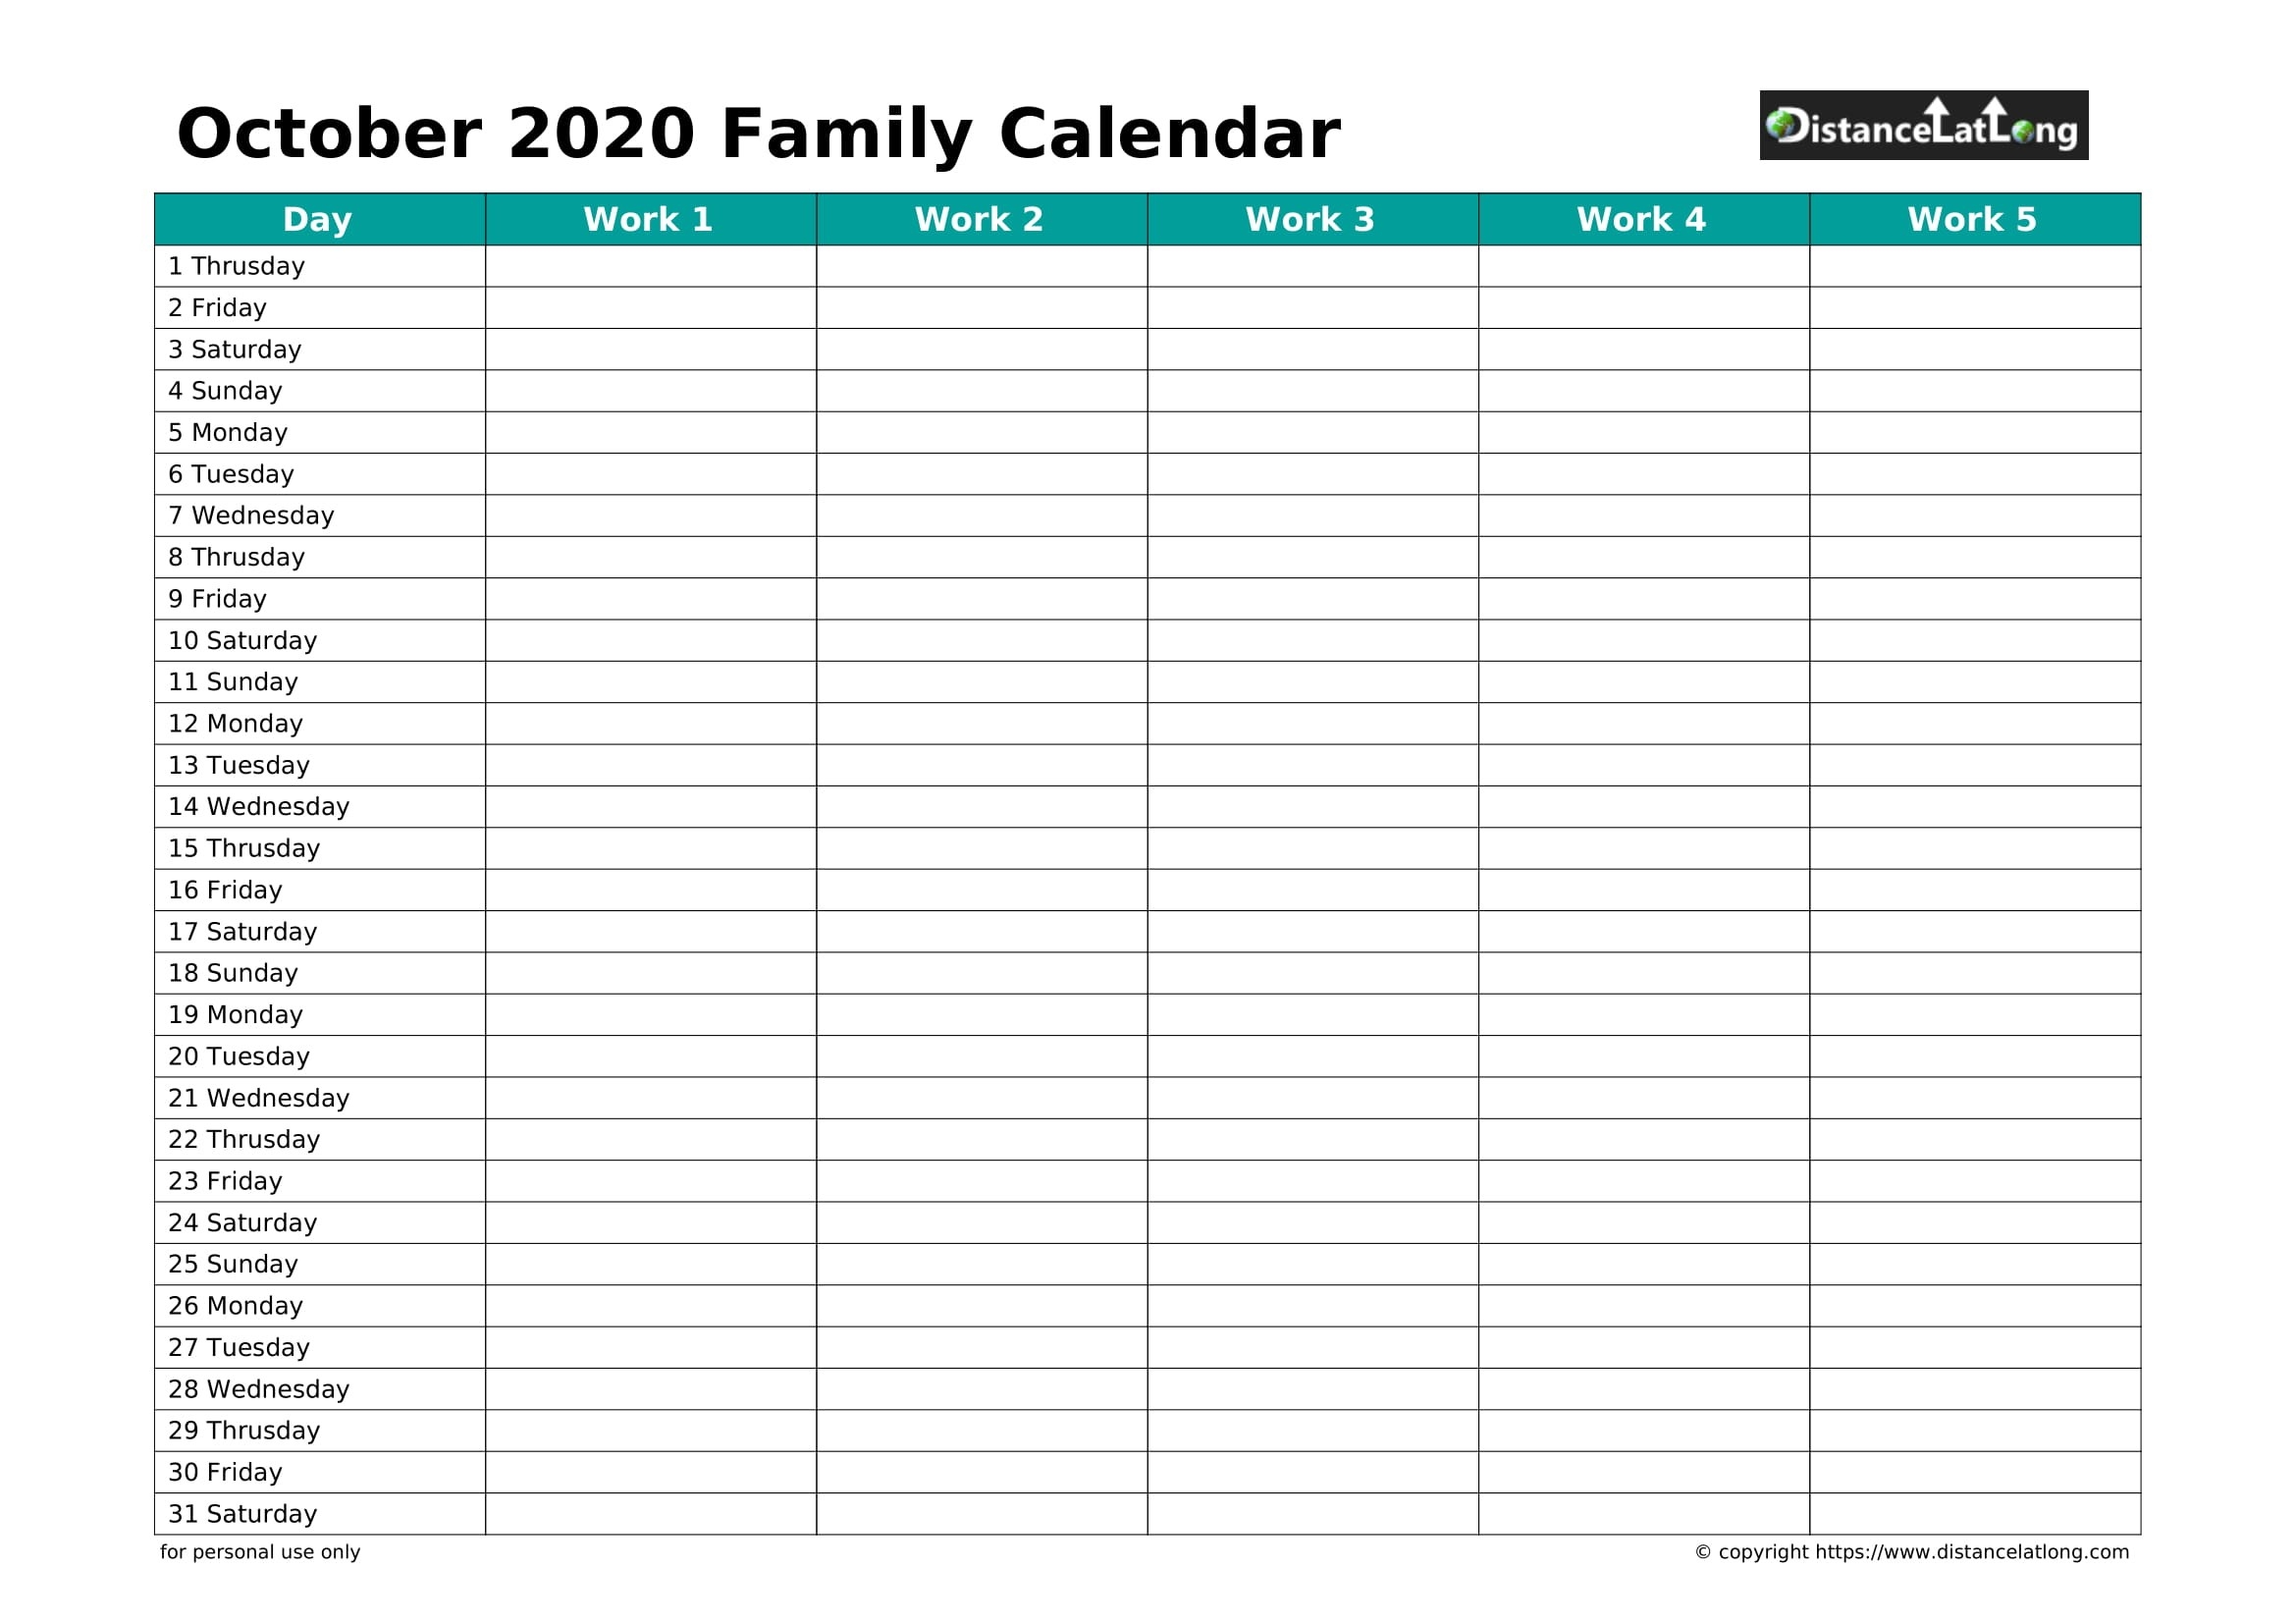 2020 Family Calendar Family Landscape Orientation Free-Day To Day Calendar Template 2020